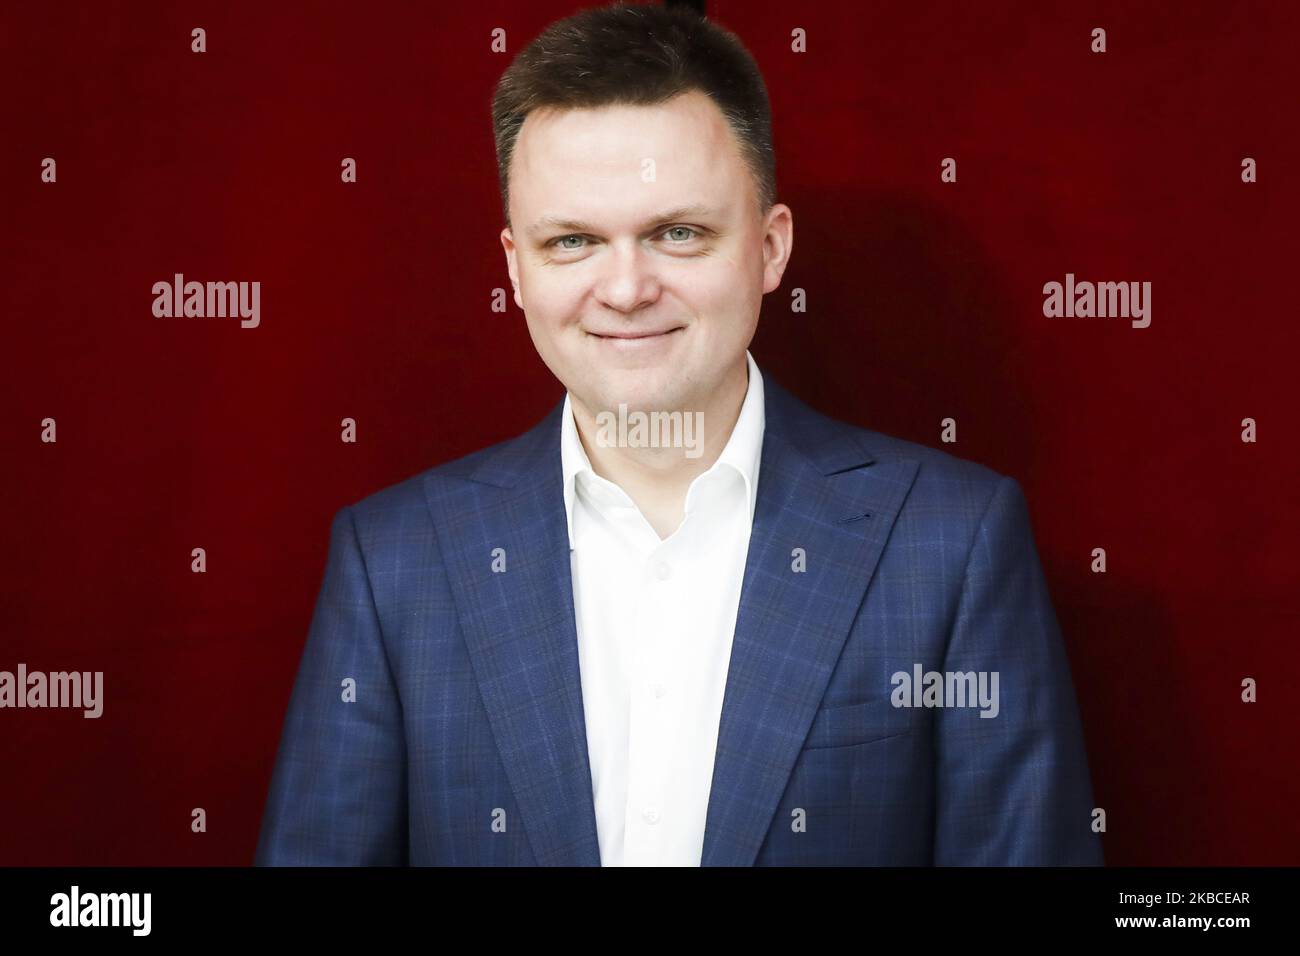 Szymon Holownia takes part in Open Eyes Economy Summit in ICE Krakow Congress Centre in Krakow, Poland, on November 20, 2019. The 43-year-old TV show host and writer known for his Catholic views, announced on Sunday, 8th December, 2019 that he will run for President of Poland in next year’s election as an independent candidate. (Photo by Beata Zawrzel/NurPhoto) Stock Photo